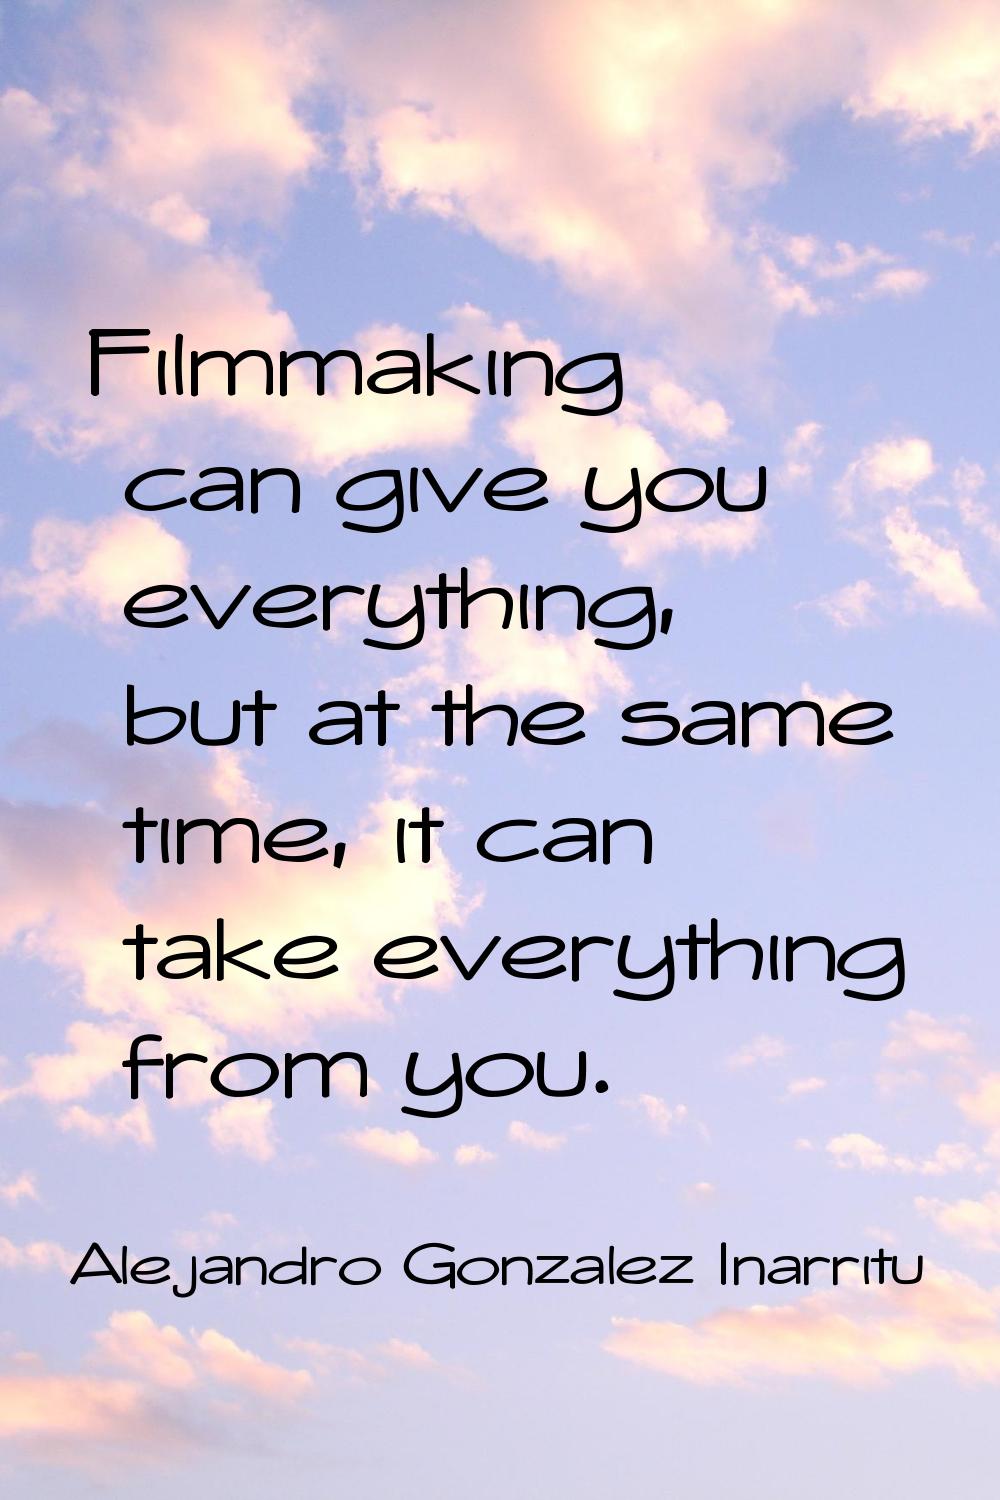 Filmmaking can give you everything, but at the same time, it can take everything from you.